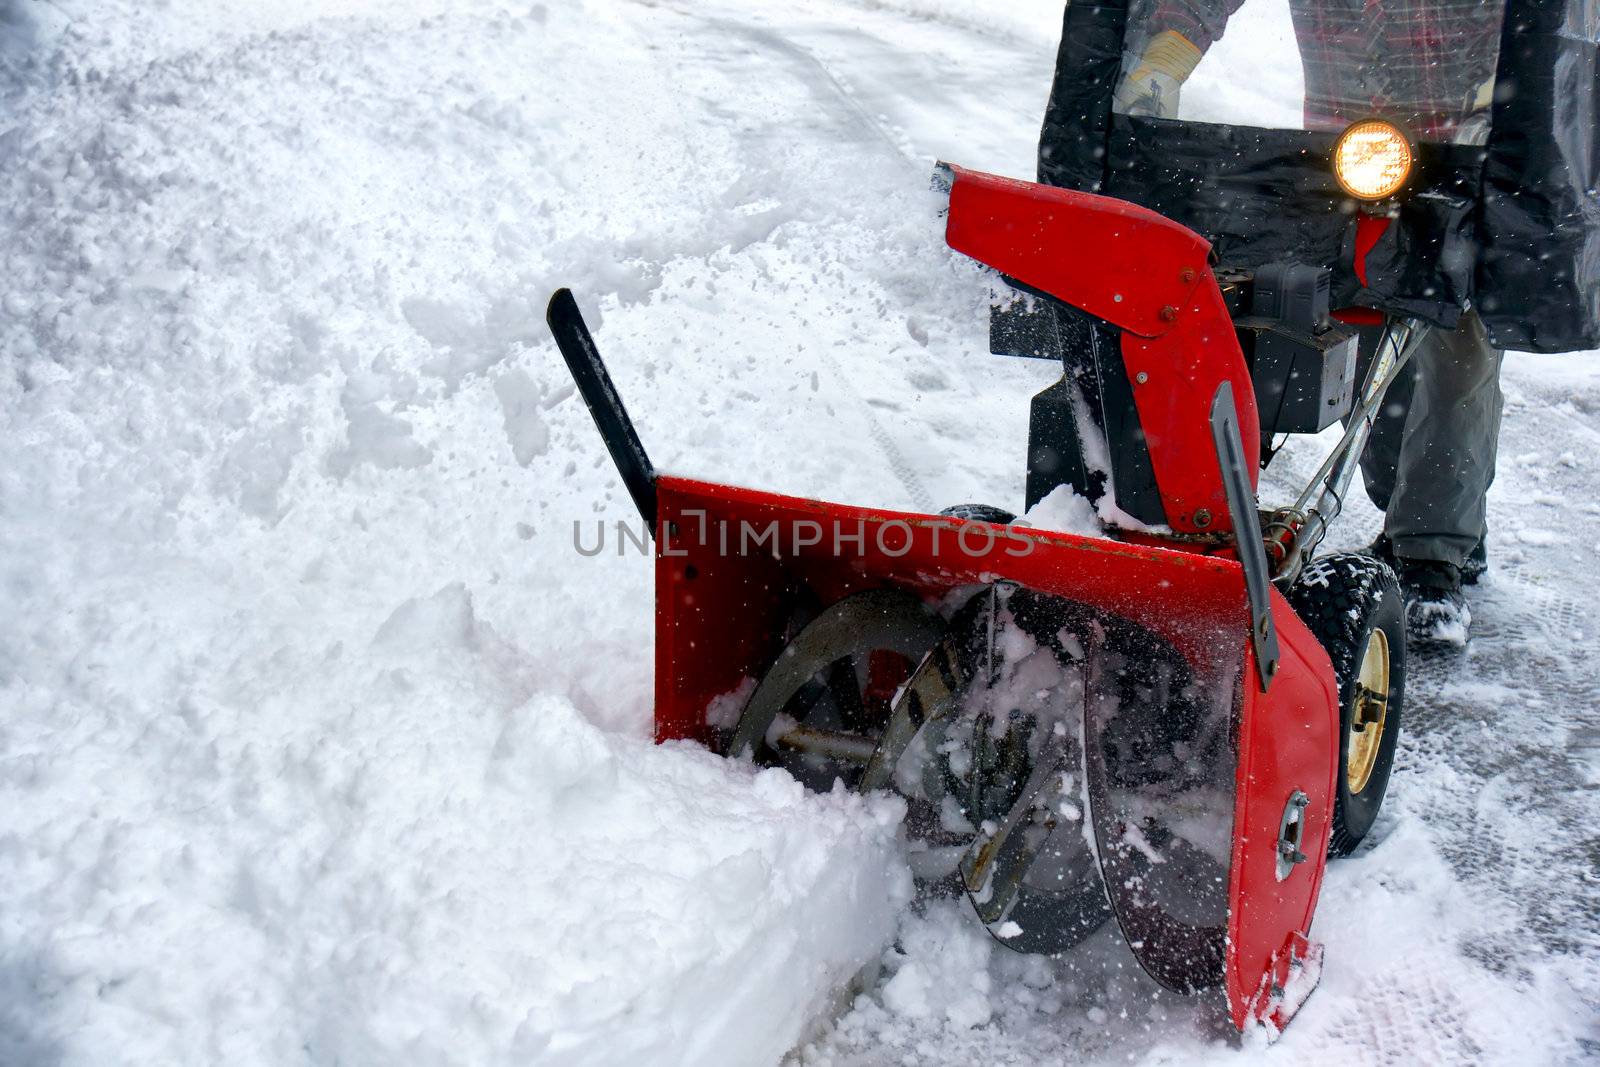 Snowblowing by Mirage3